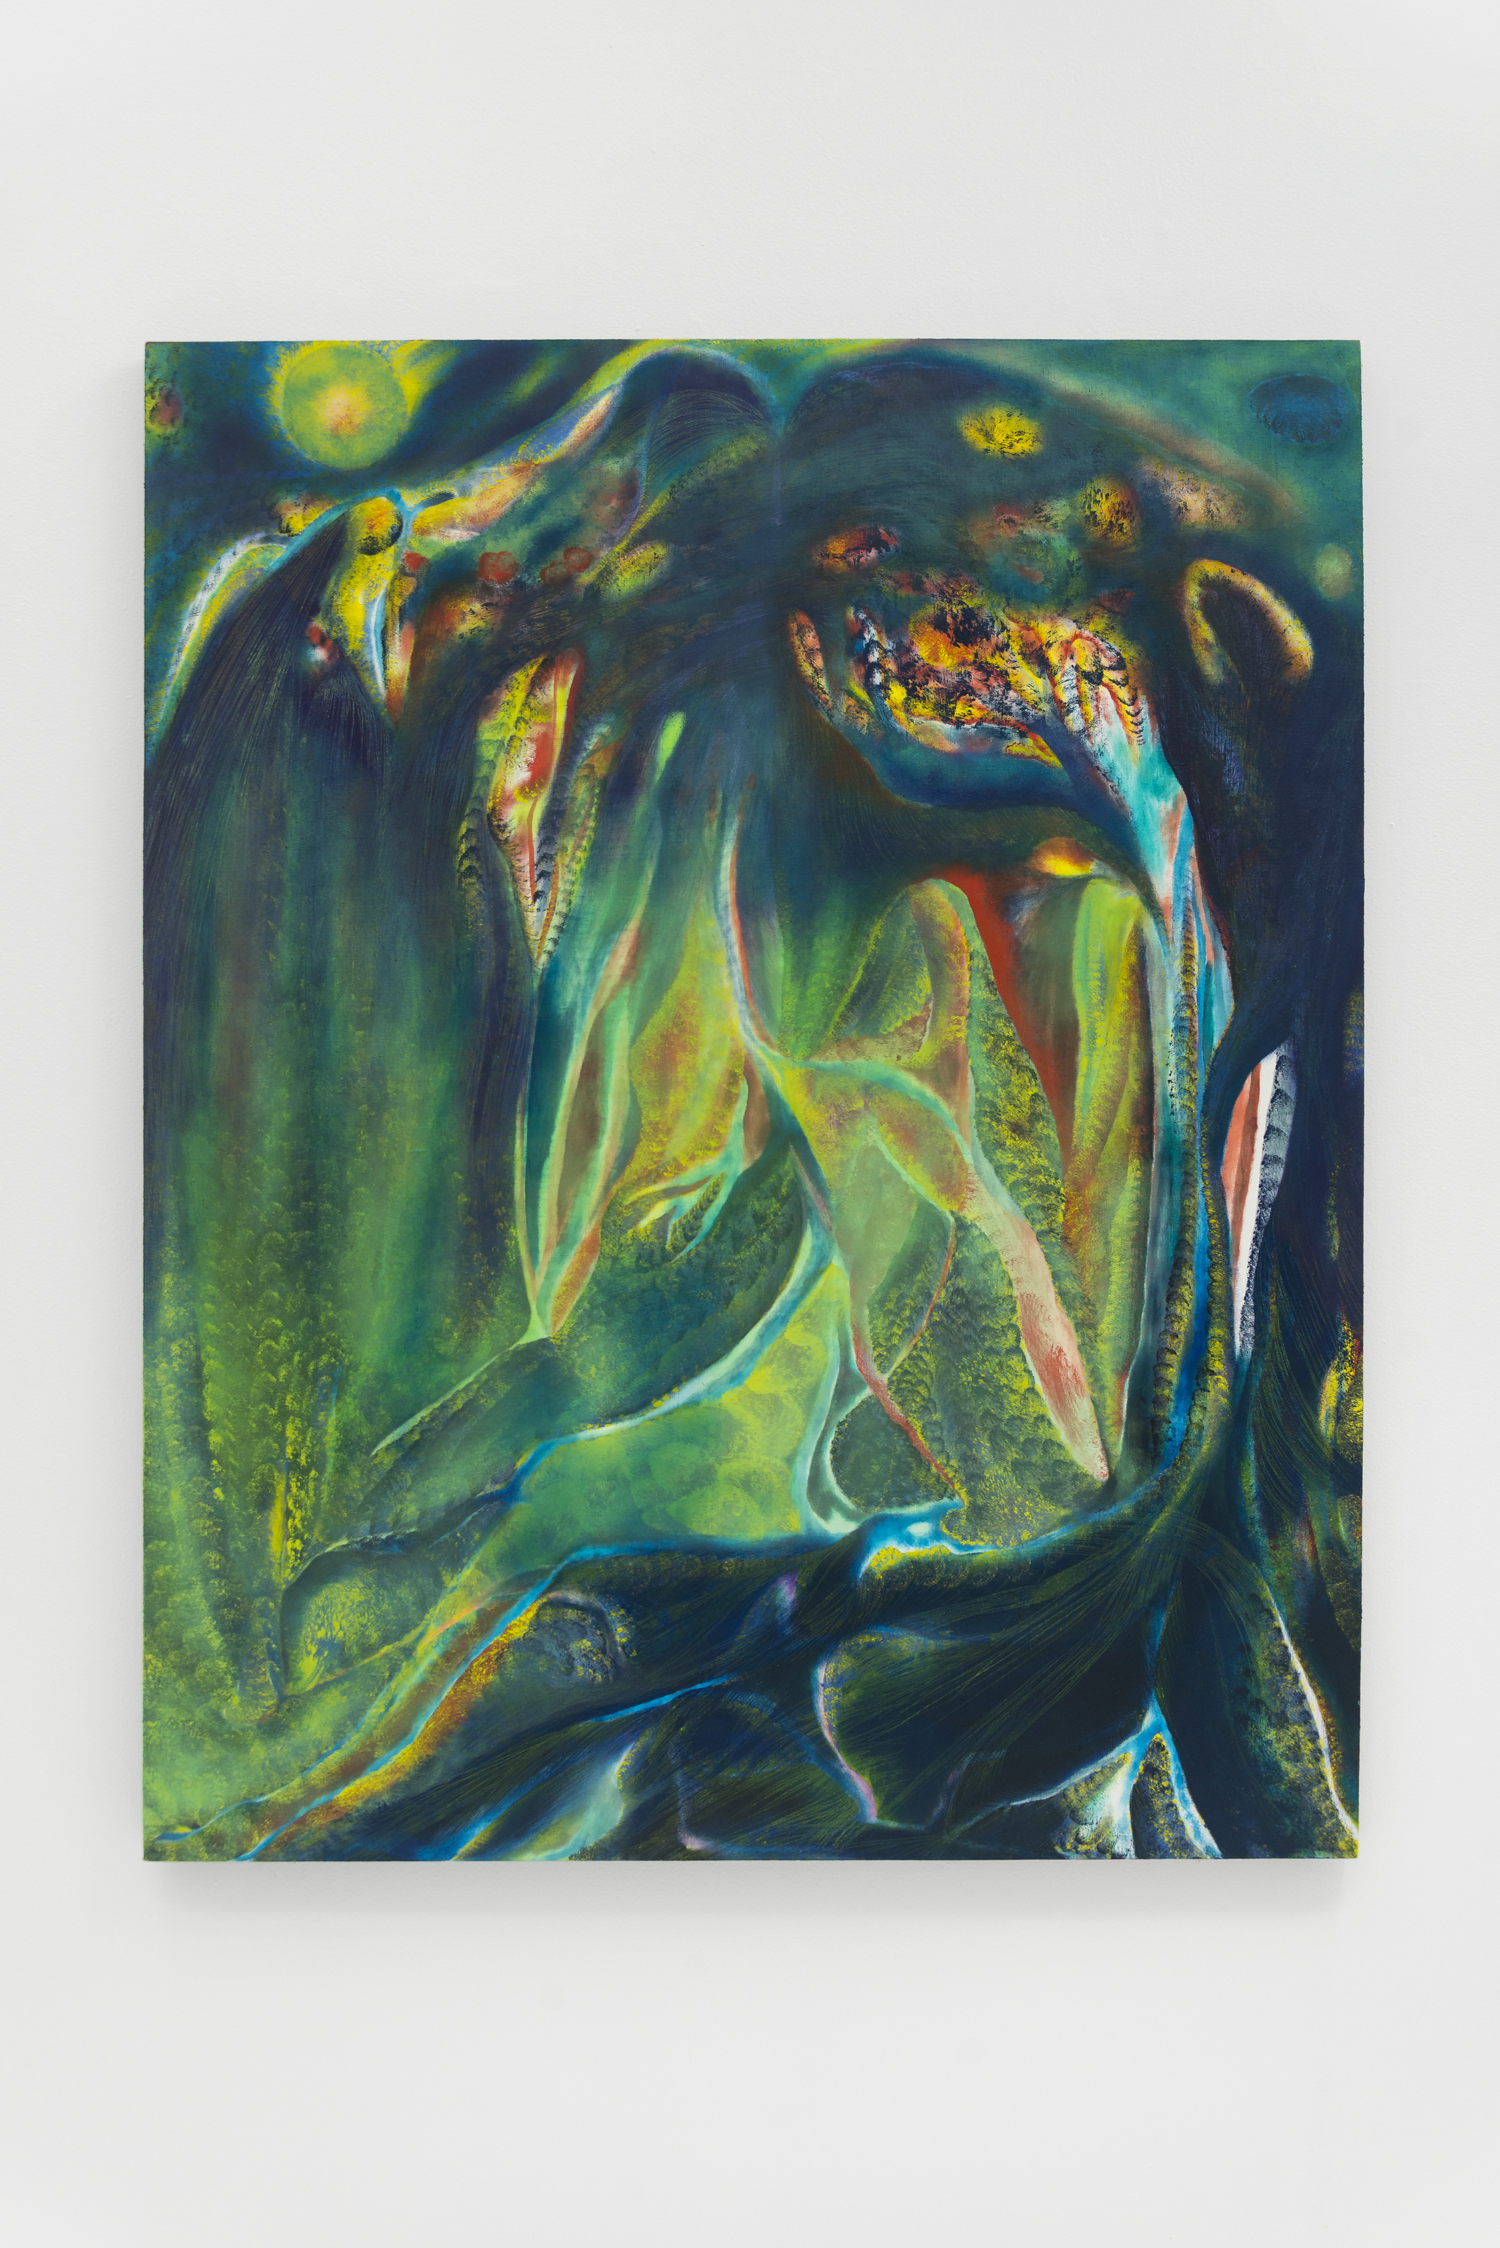  Lucy Bull,  Untitled (Giving Tree) , 2019, Oil on linen, 60 x 48 inches 